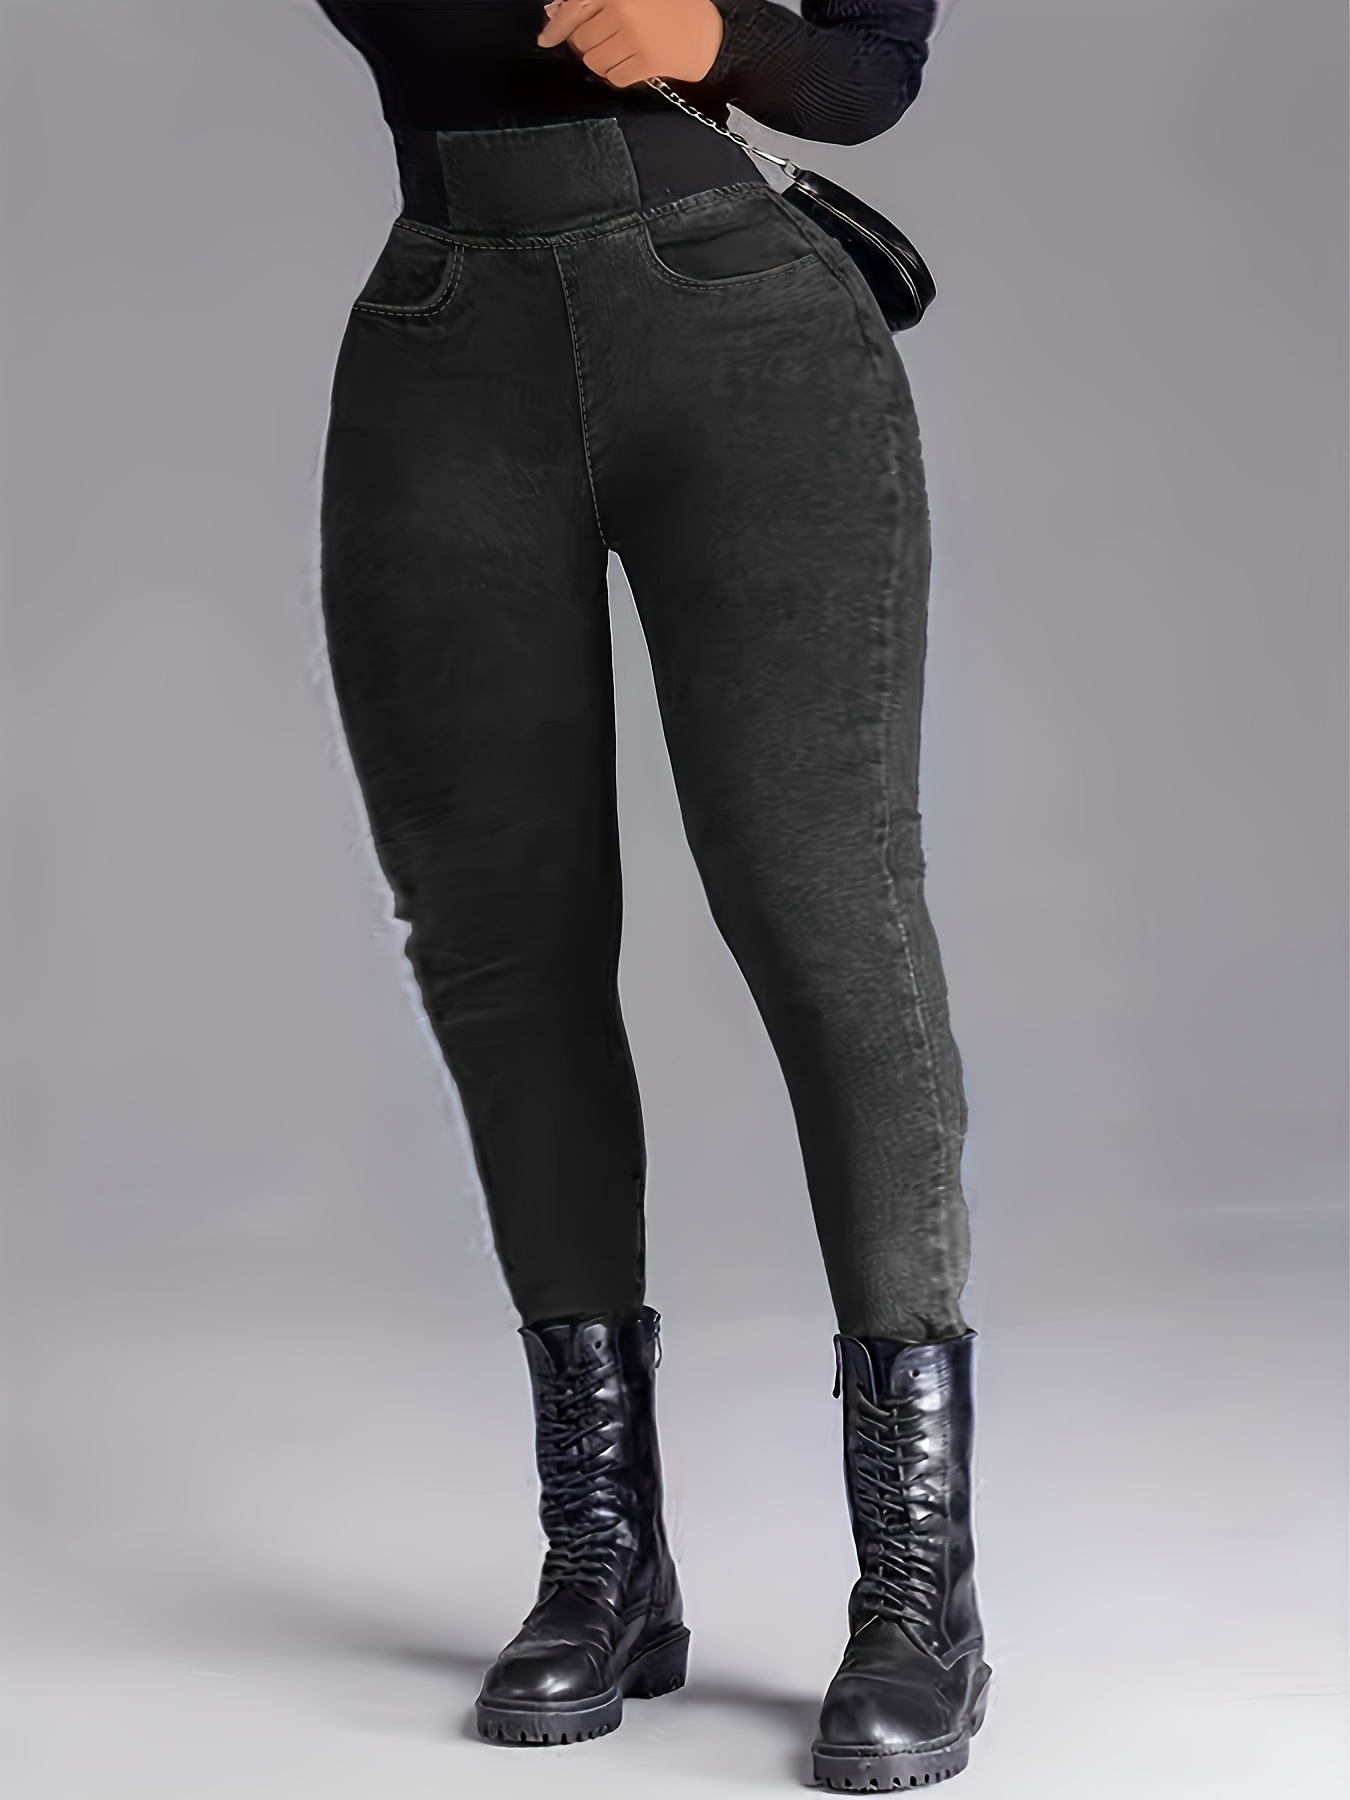  Leggings with Pockets for Women High Waisted Jeggings